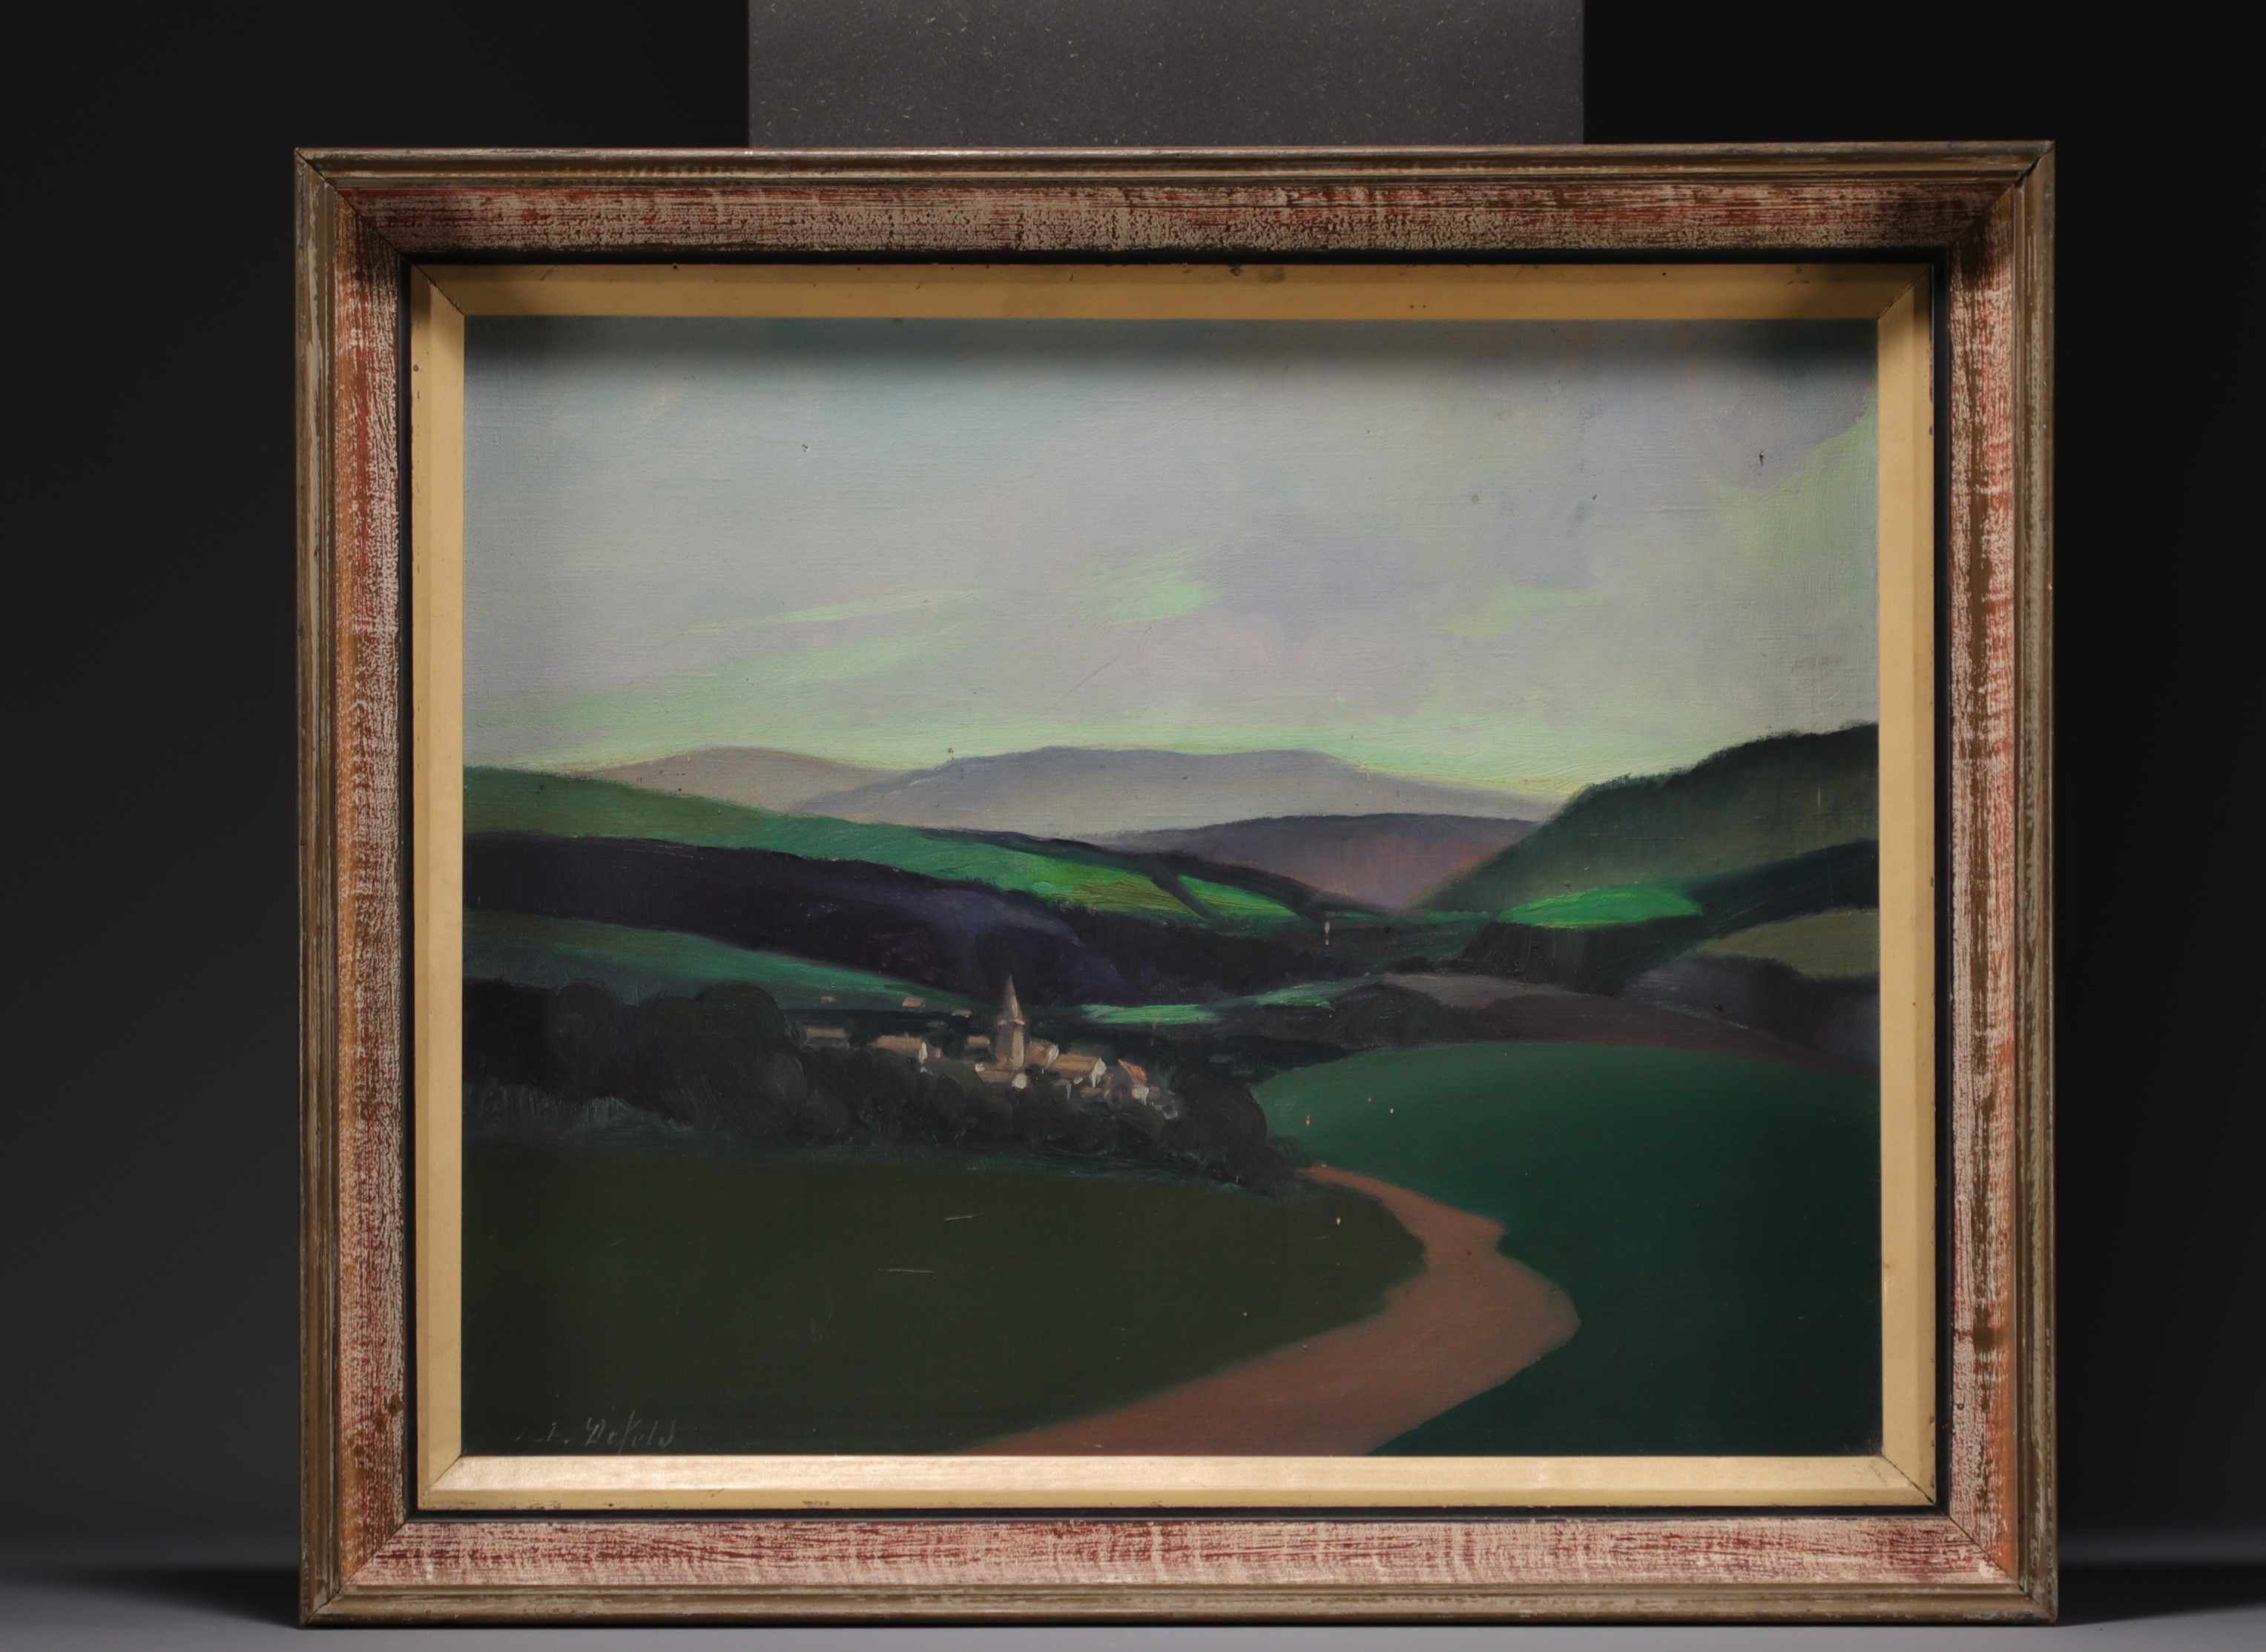 Jean DEFELD (1886-1933) "Bivels, Grand Duchy of Luxembourg" Oil on canvas. - Image 2 of 2